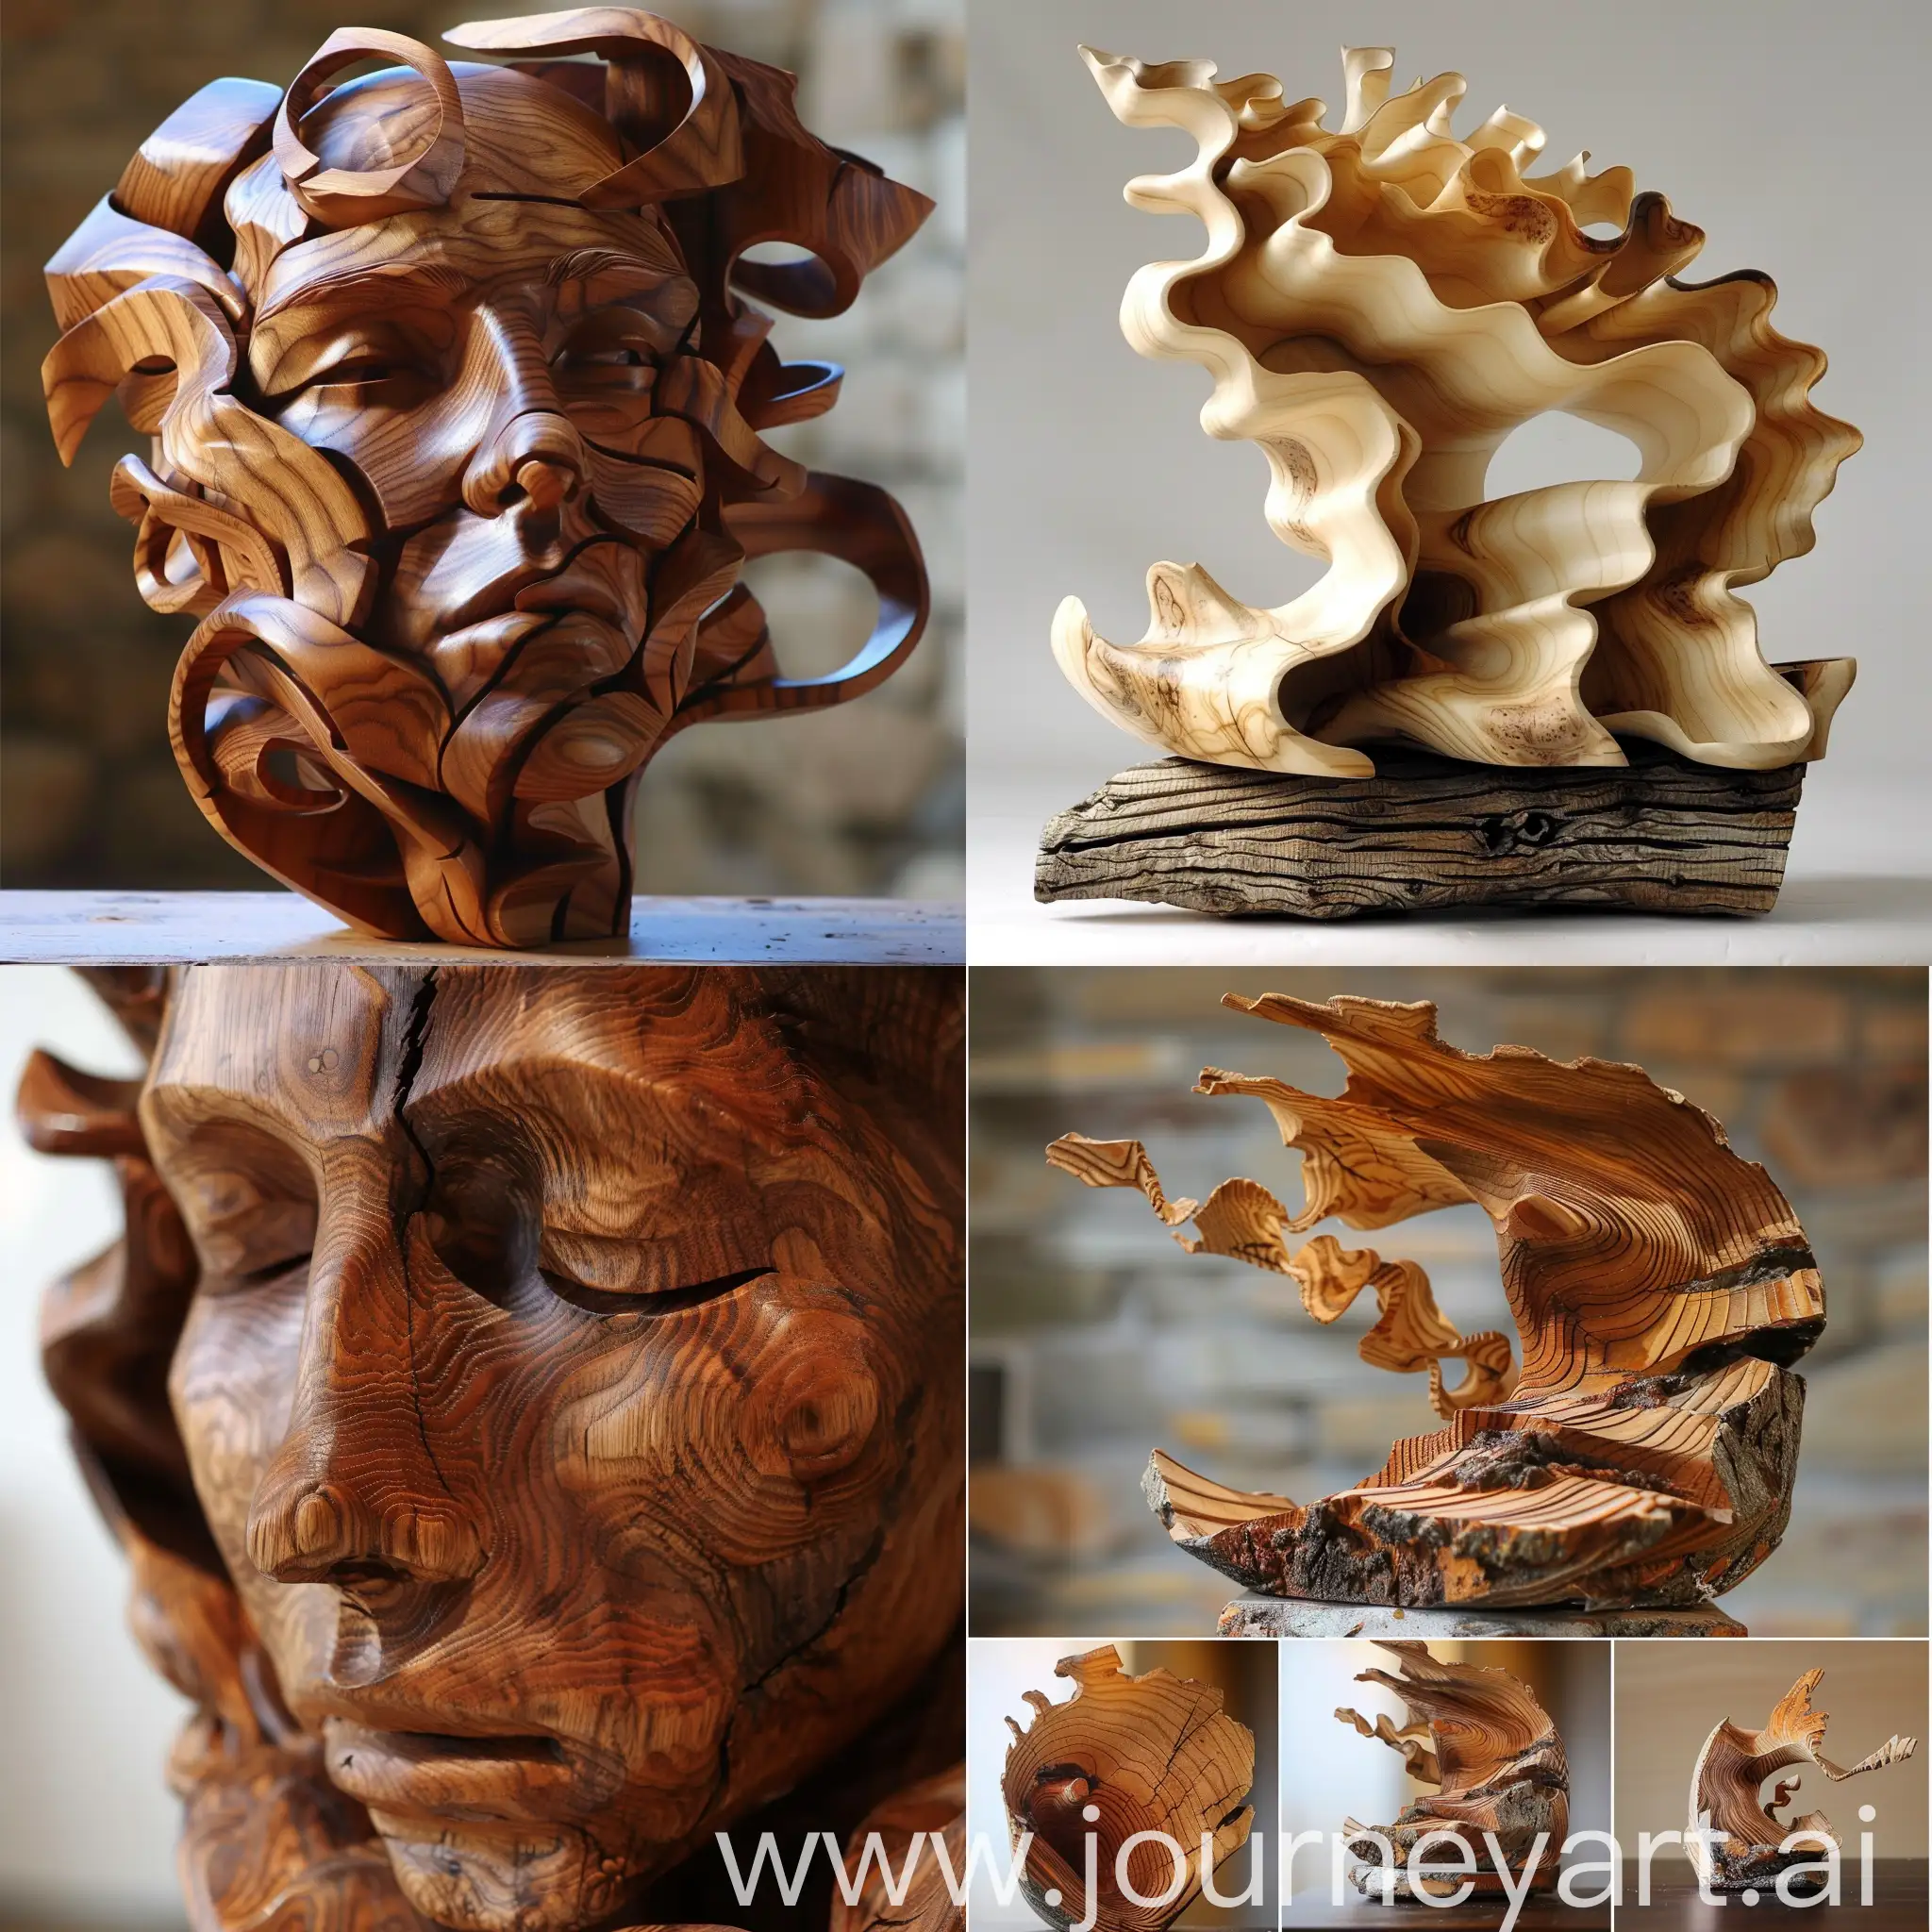 Intricate-Wood-Sculpture-Majestic-Artistry-Captured-in-Vivid-Detail